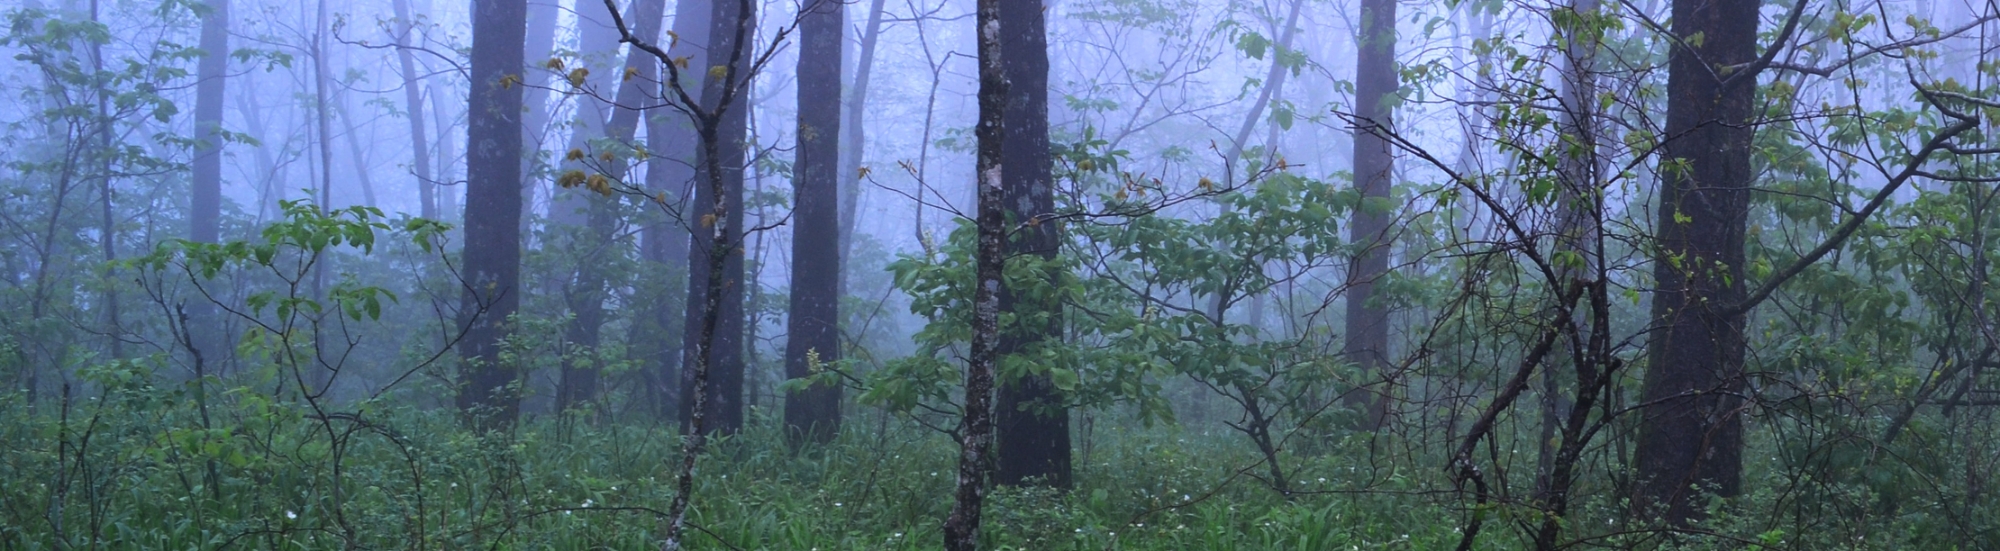 Foggy morning in the Ouachita Forest